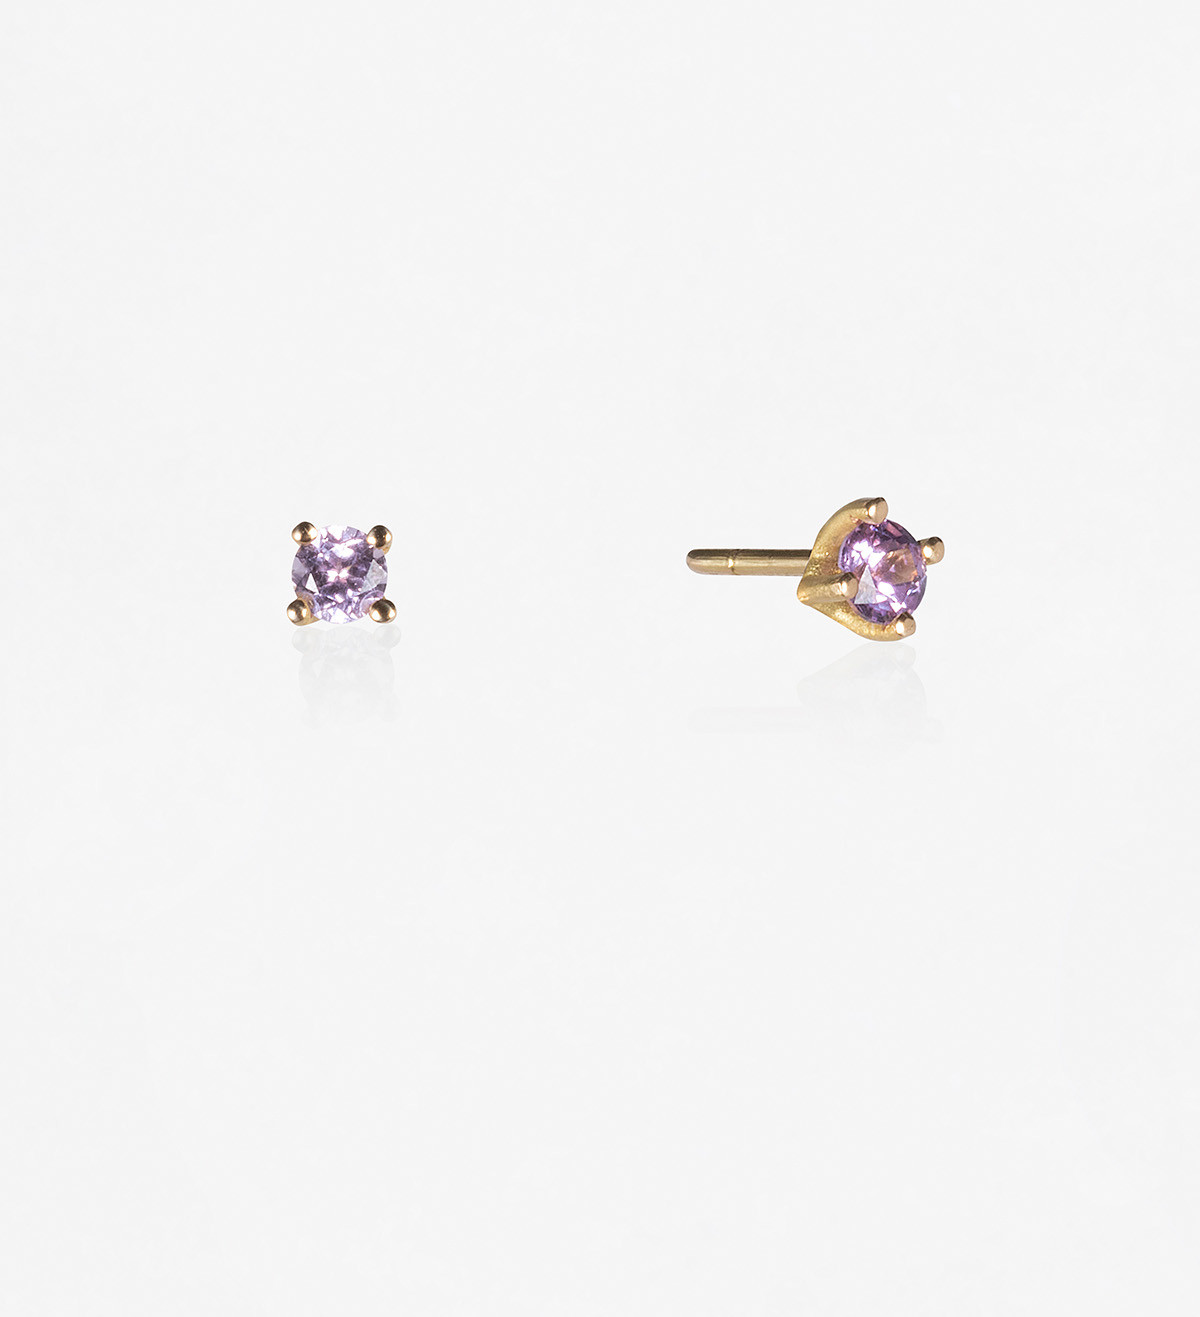 18k gold earrings with purple Wennick-Lefèvre sapphires 0,42ct